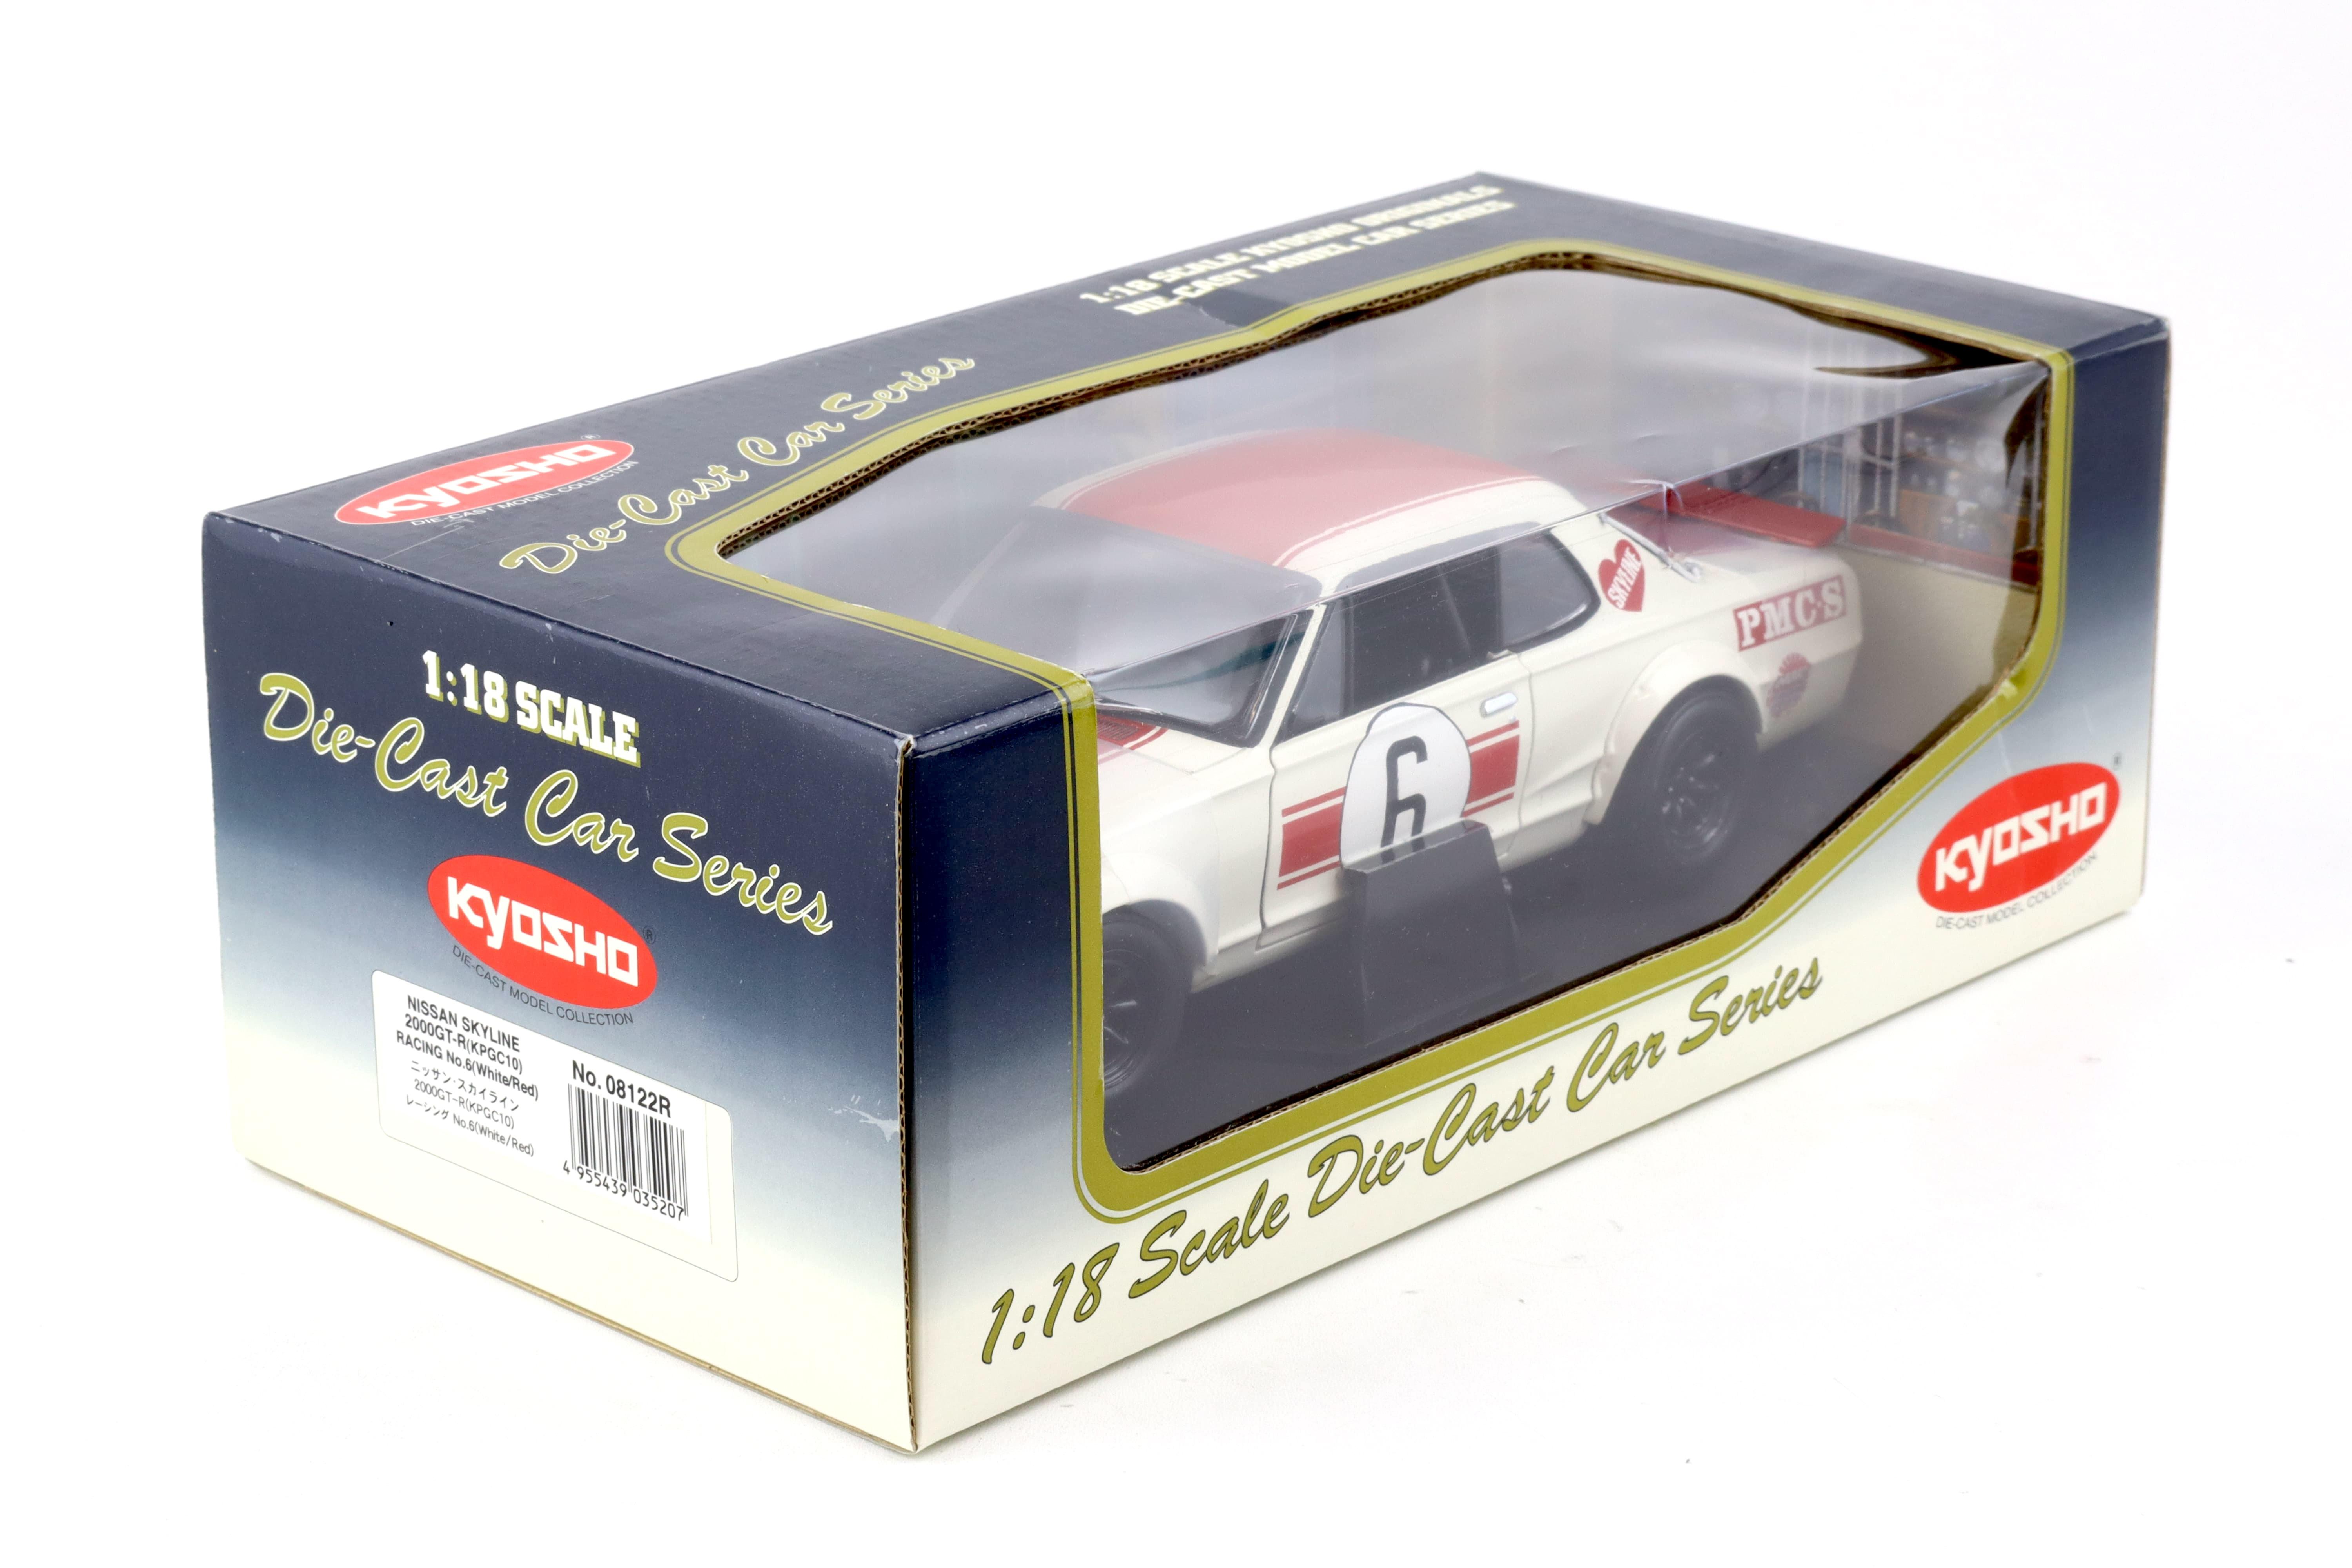 1:18 Kyosho Nissan Skyline 2000 GT-R (KPGC10) Racing #6 white/red 08122R